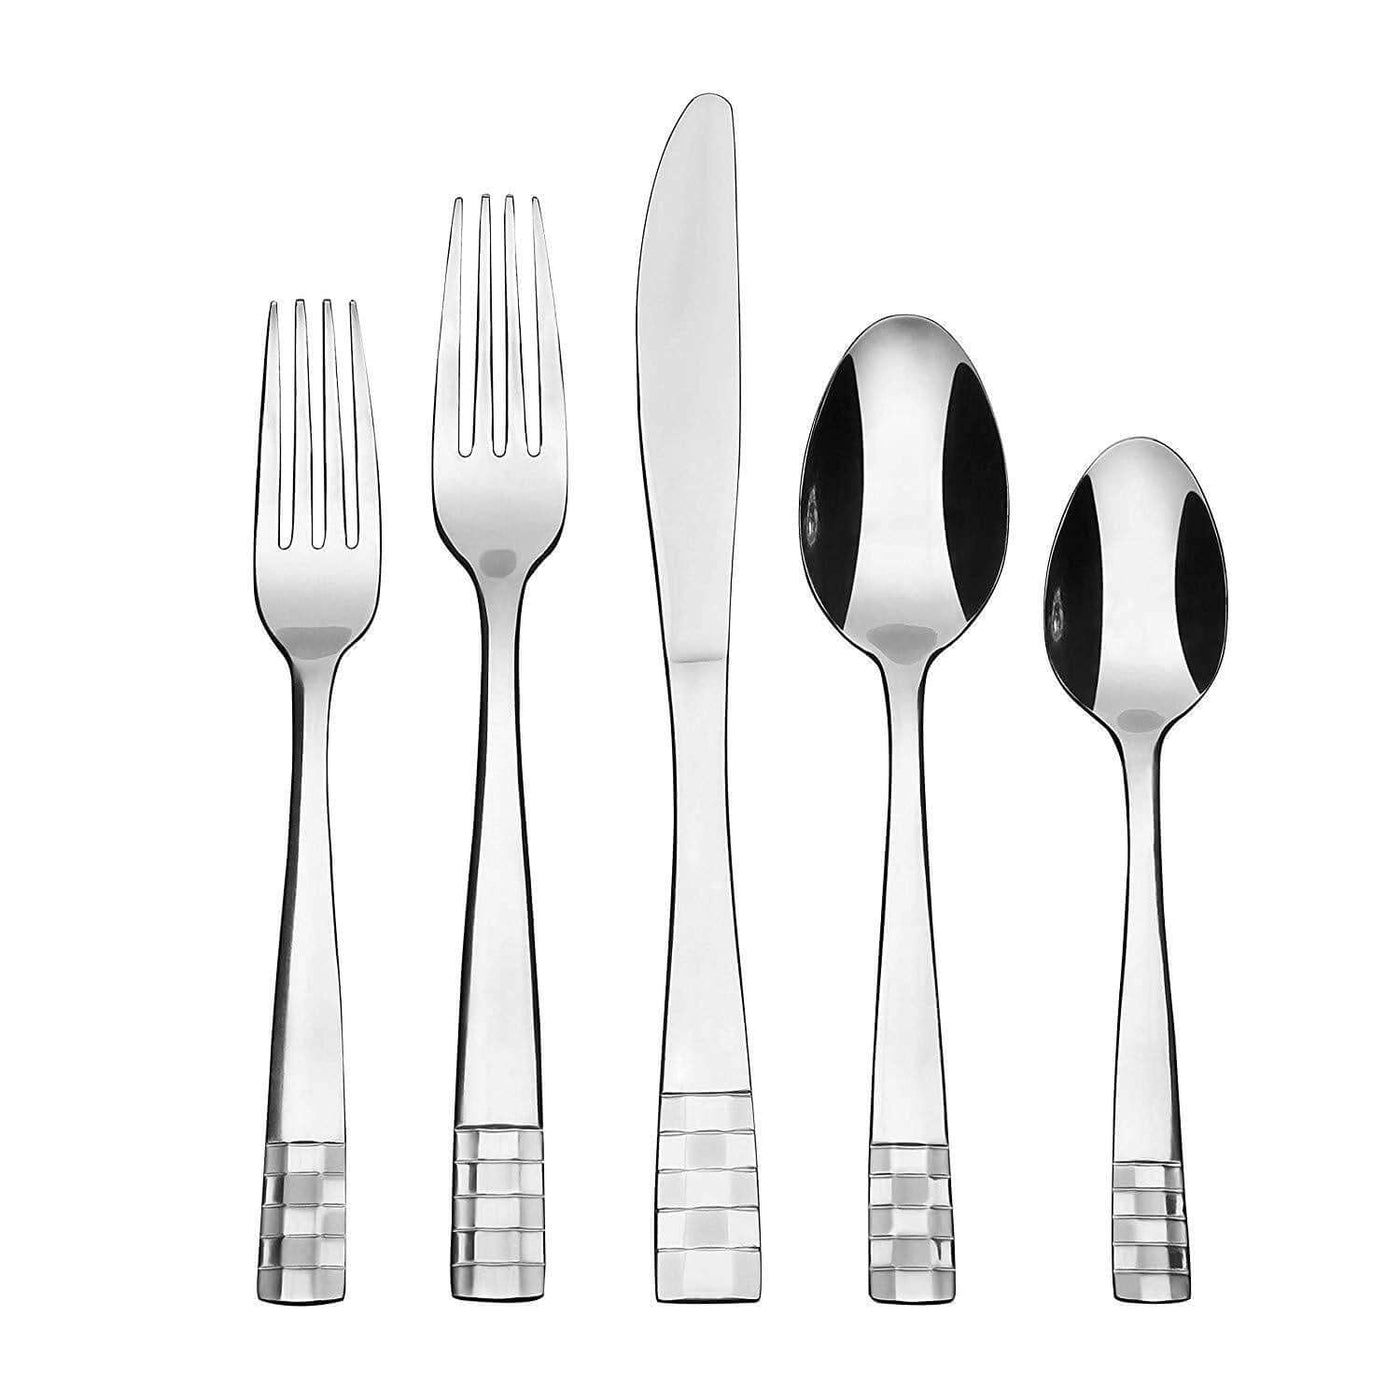 KitchenTrend 20-piece Stainless Steel Silverware Set (Service for 4) Checkmate